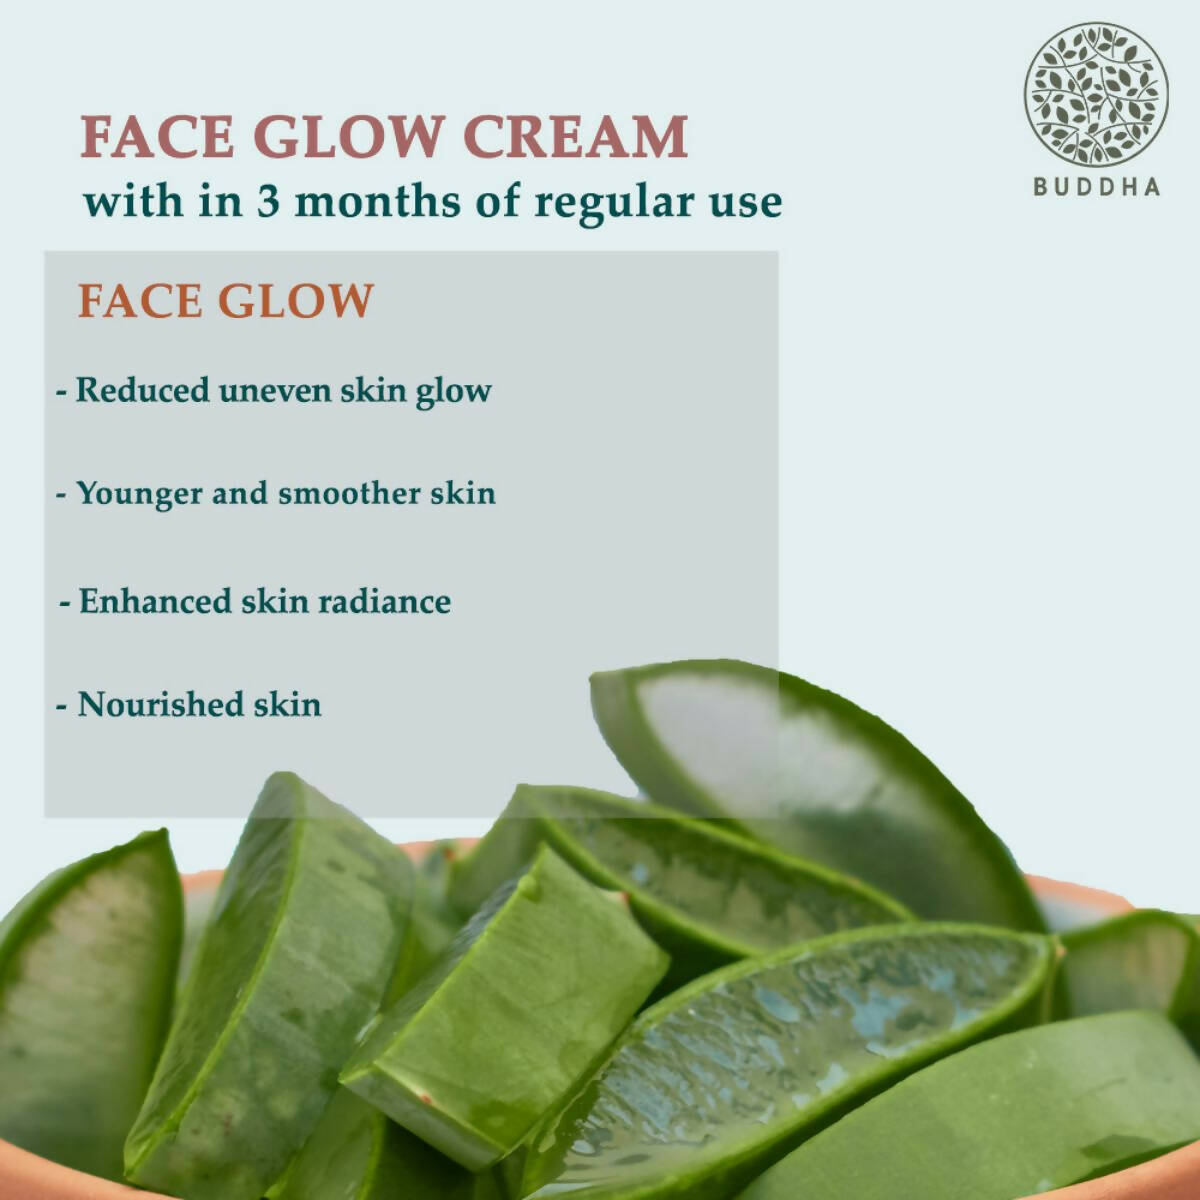 Buddha Natural Face Glow Cream - Helps Achieve an Instant White Glow and Shining, Bright Skin